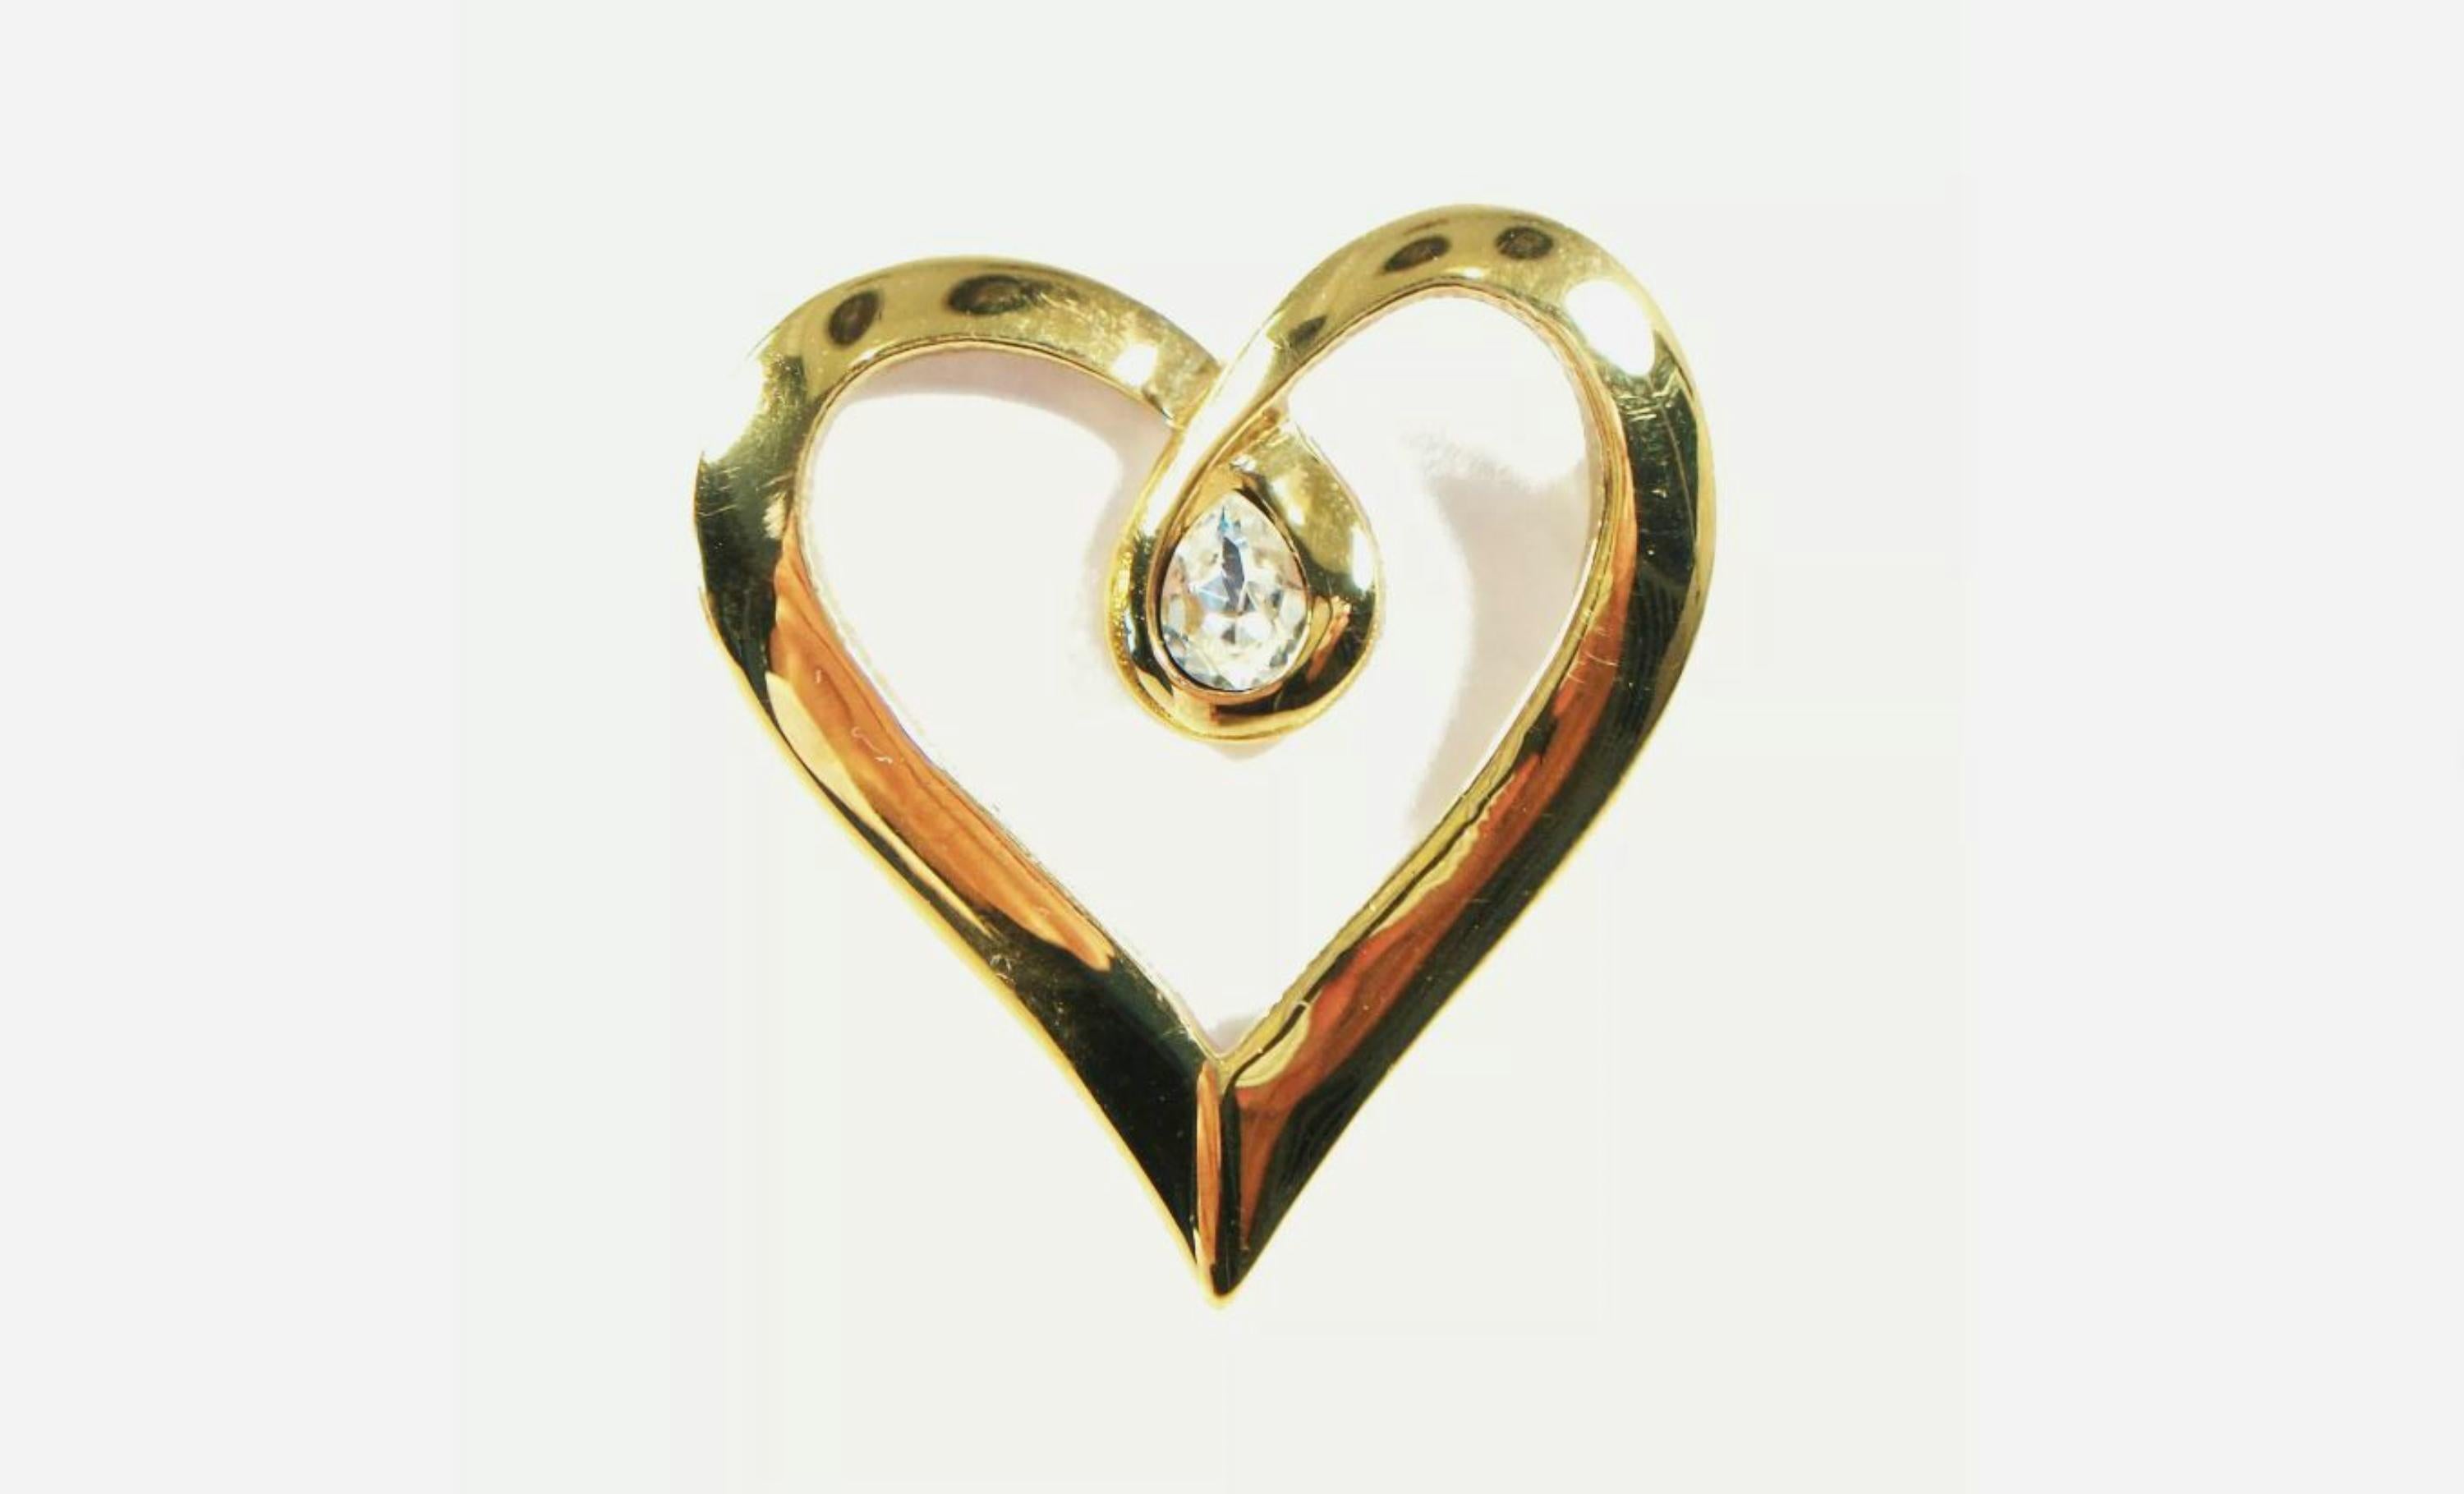 BUTLER - Vintage gold tone heart brooch - set with a single pear shaped rhinestone - hinged pin to the back - signed - circa 1980's.

Excellent vintage condition - no loss - no damage - no repairs - fine surface scratches from age and use - ready to